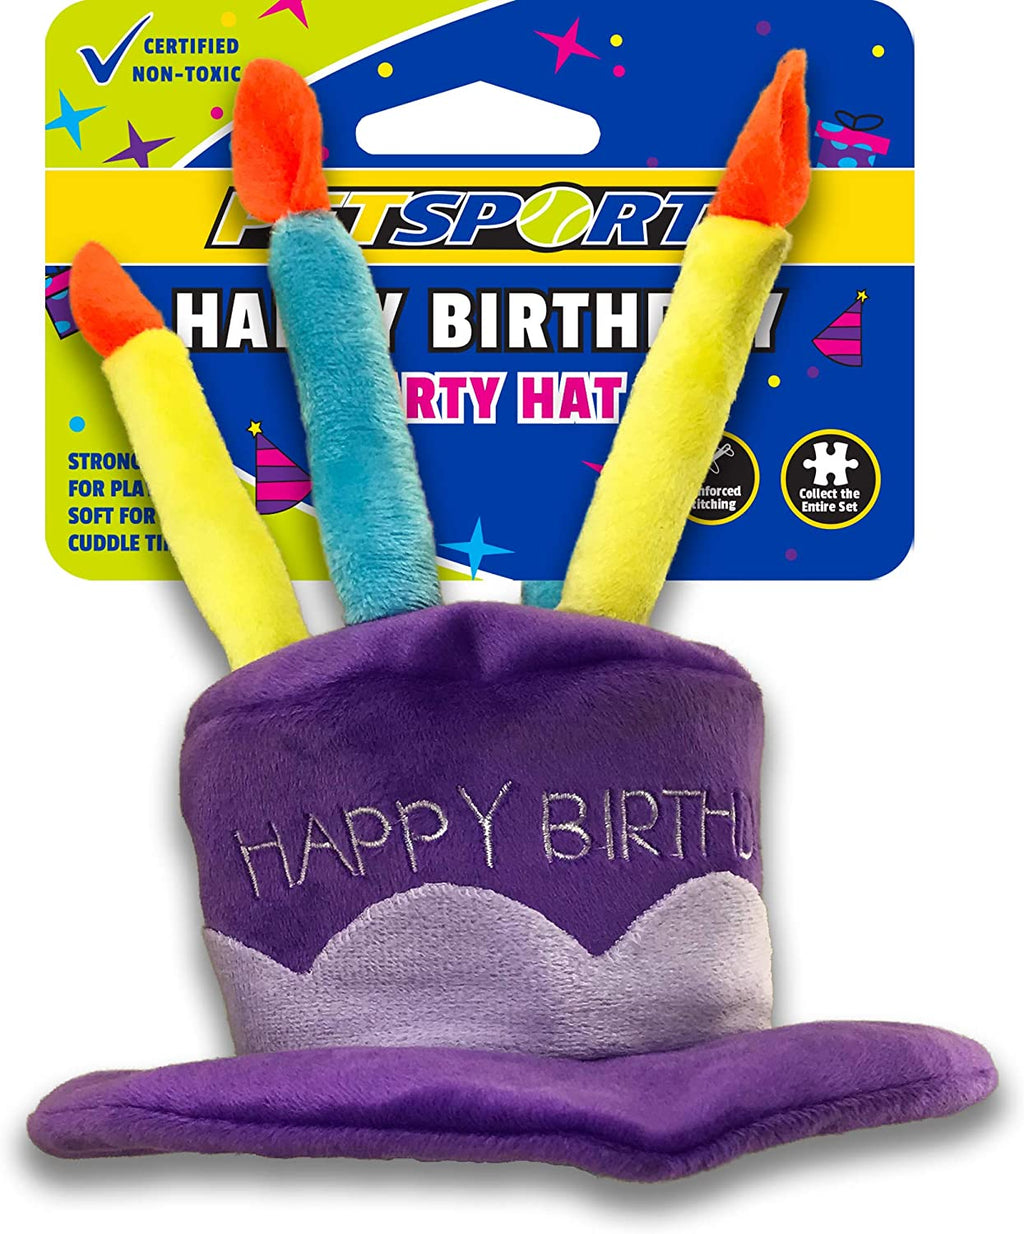 Happy Birthday Party Hat by Petsport